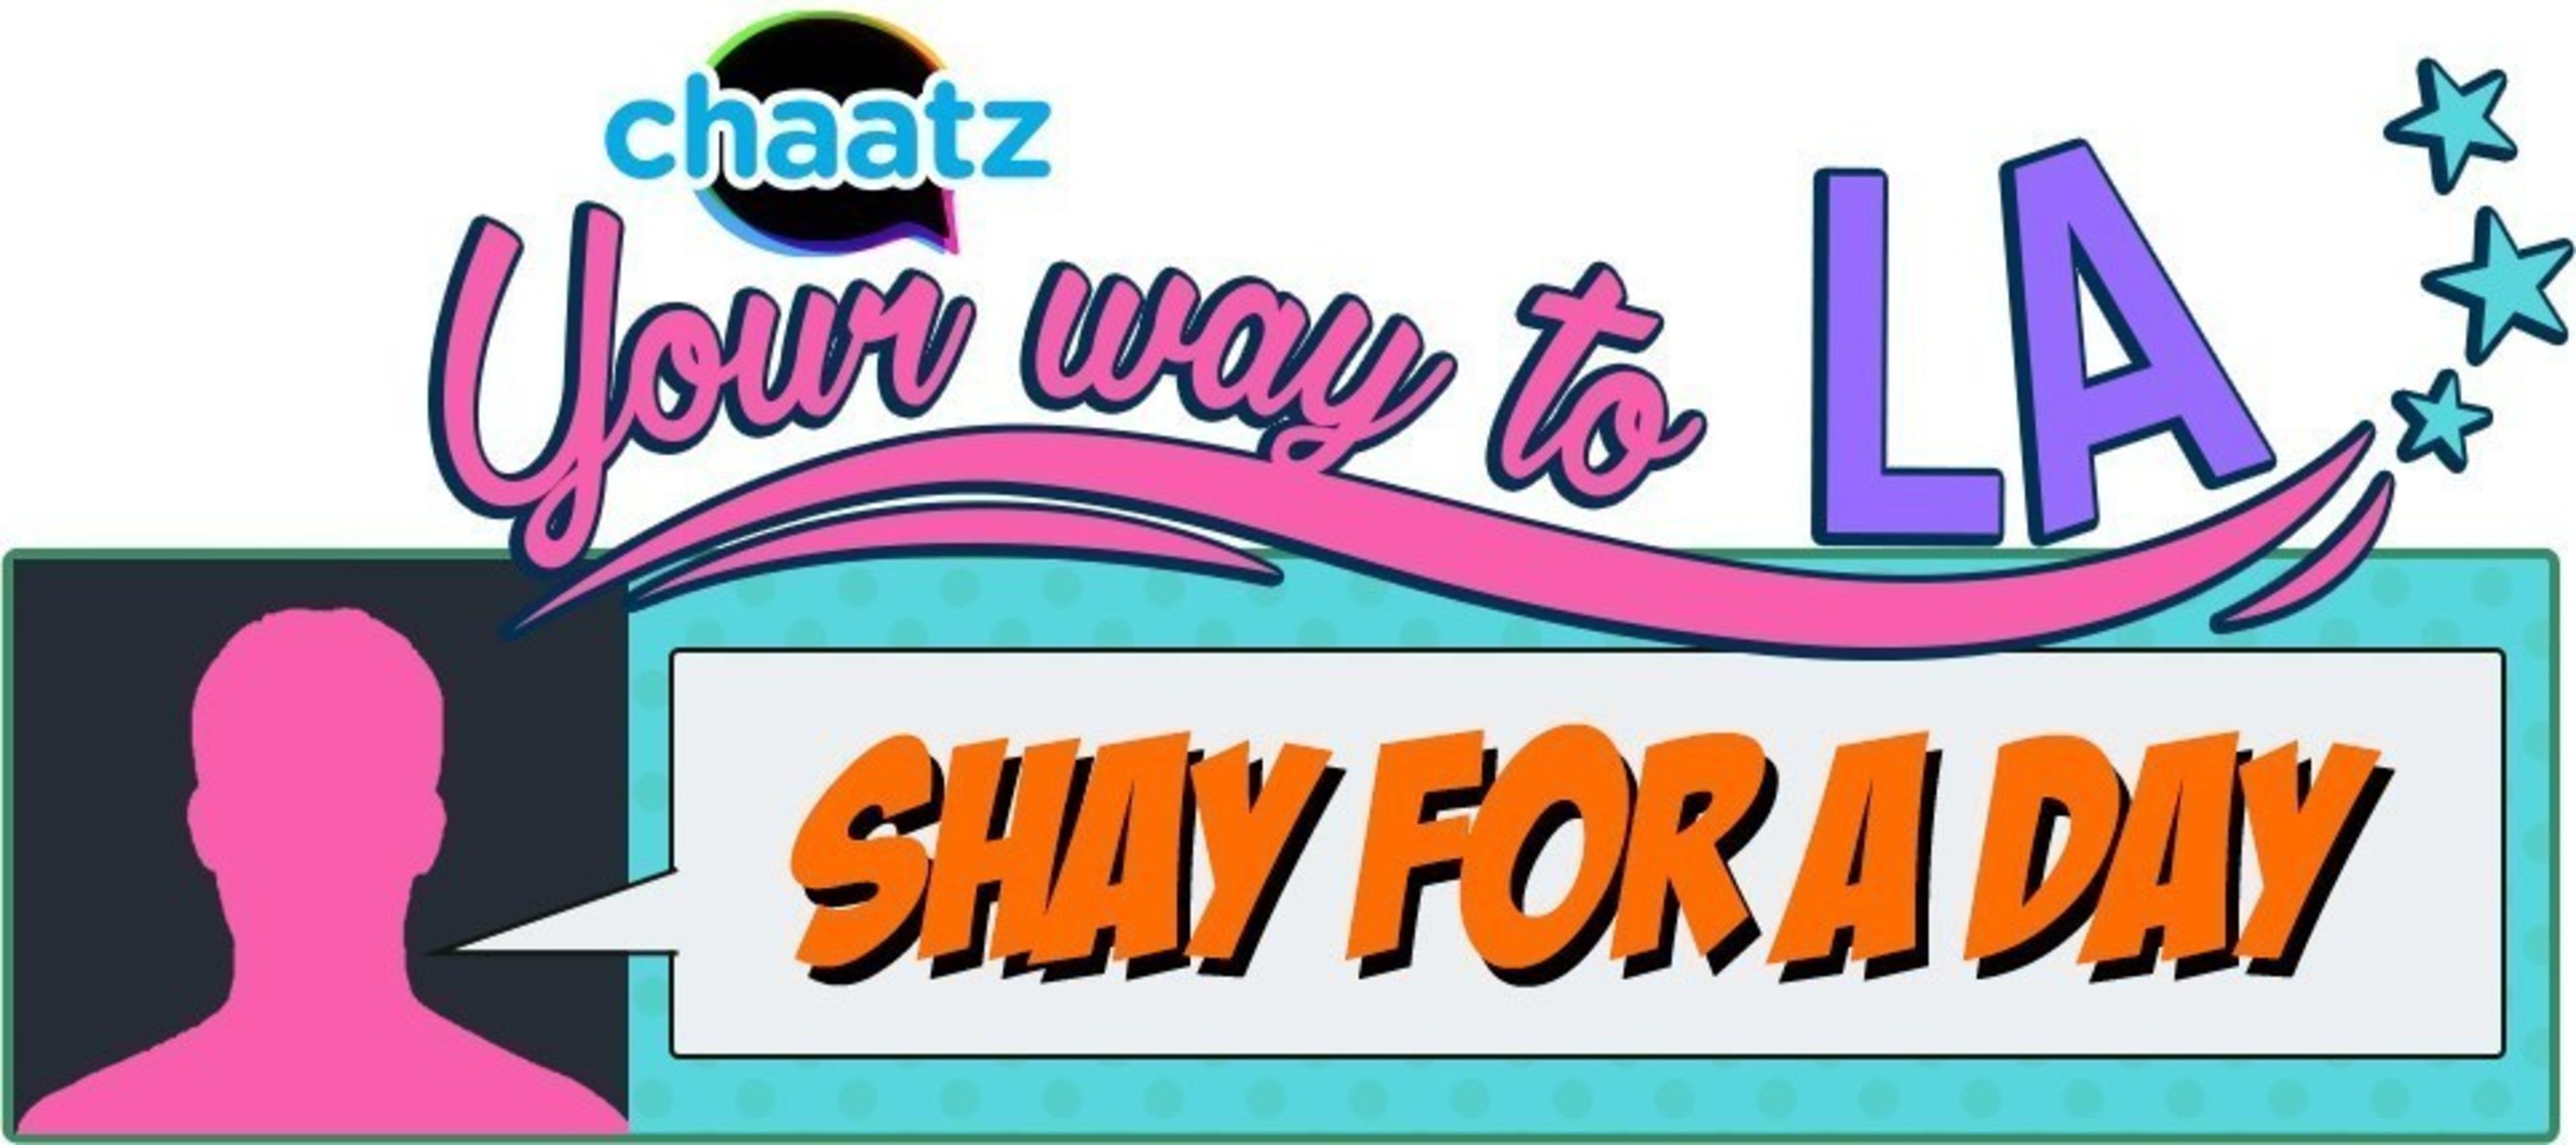 Shay's fans can now connect with her through her personal Chaatz account, and send Winks (personalized photo emojis) for the chance to win awesome Shay curated prizes every week.